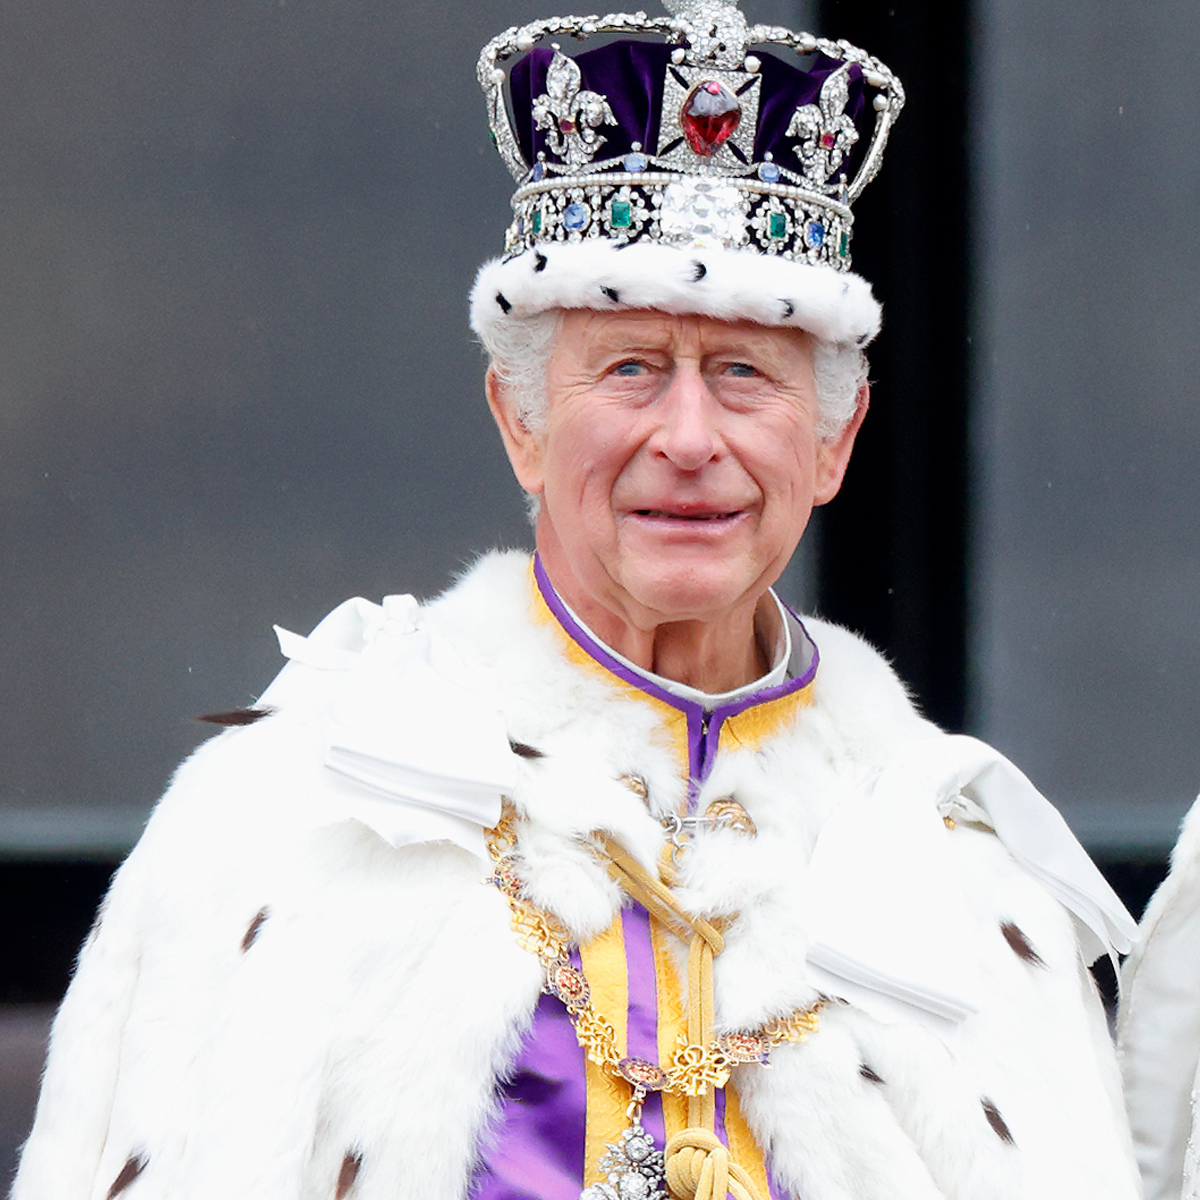 King Charles III's Official Coronation Portrait Revealed